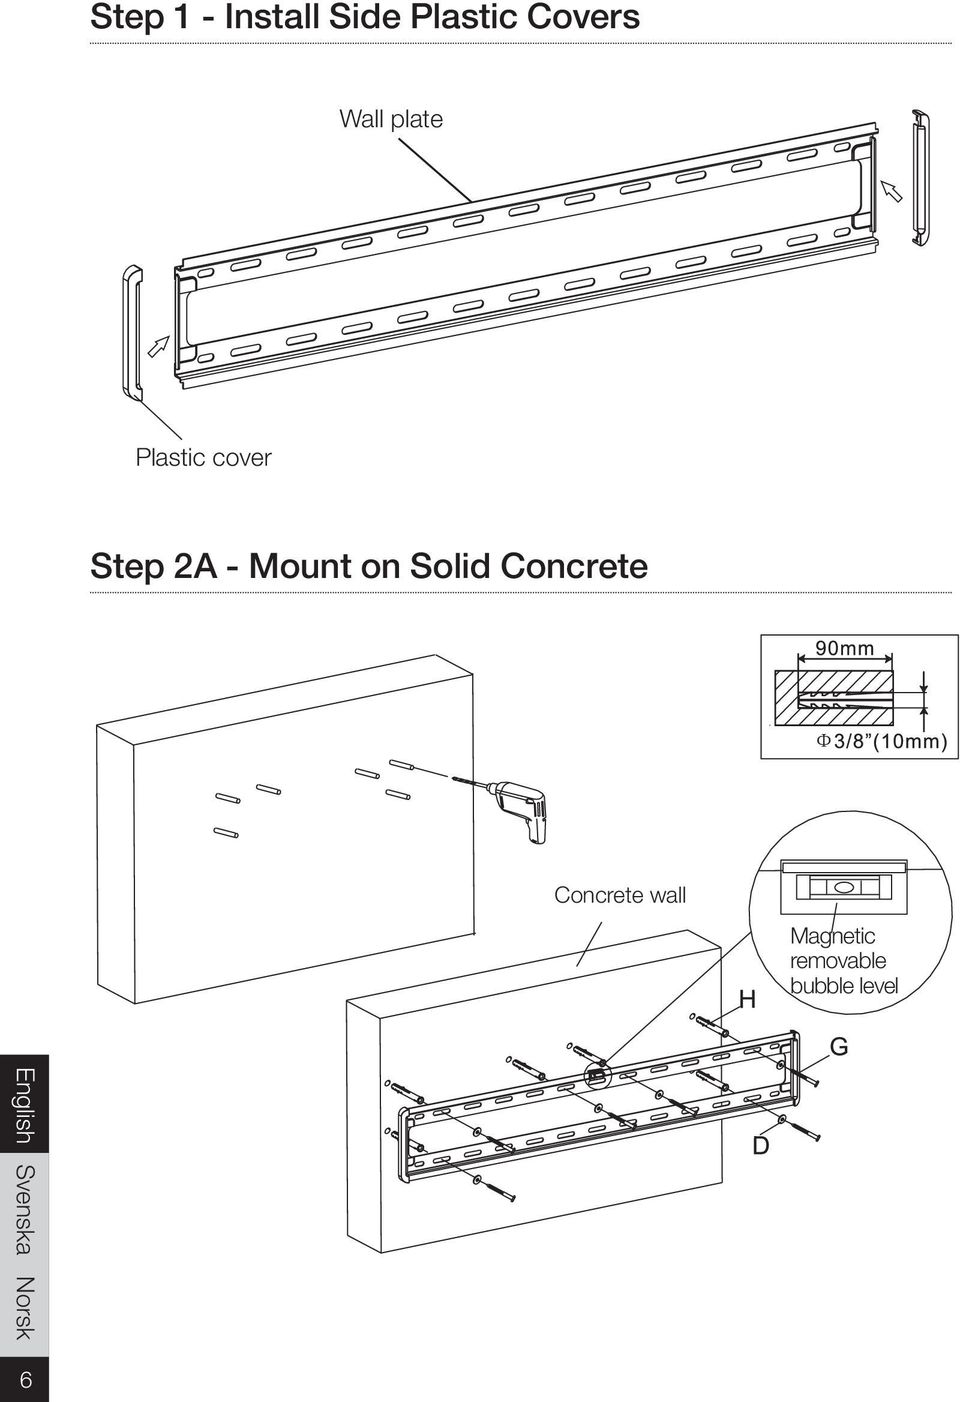 Step 2A - Mount on Solid Concrete